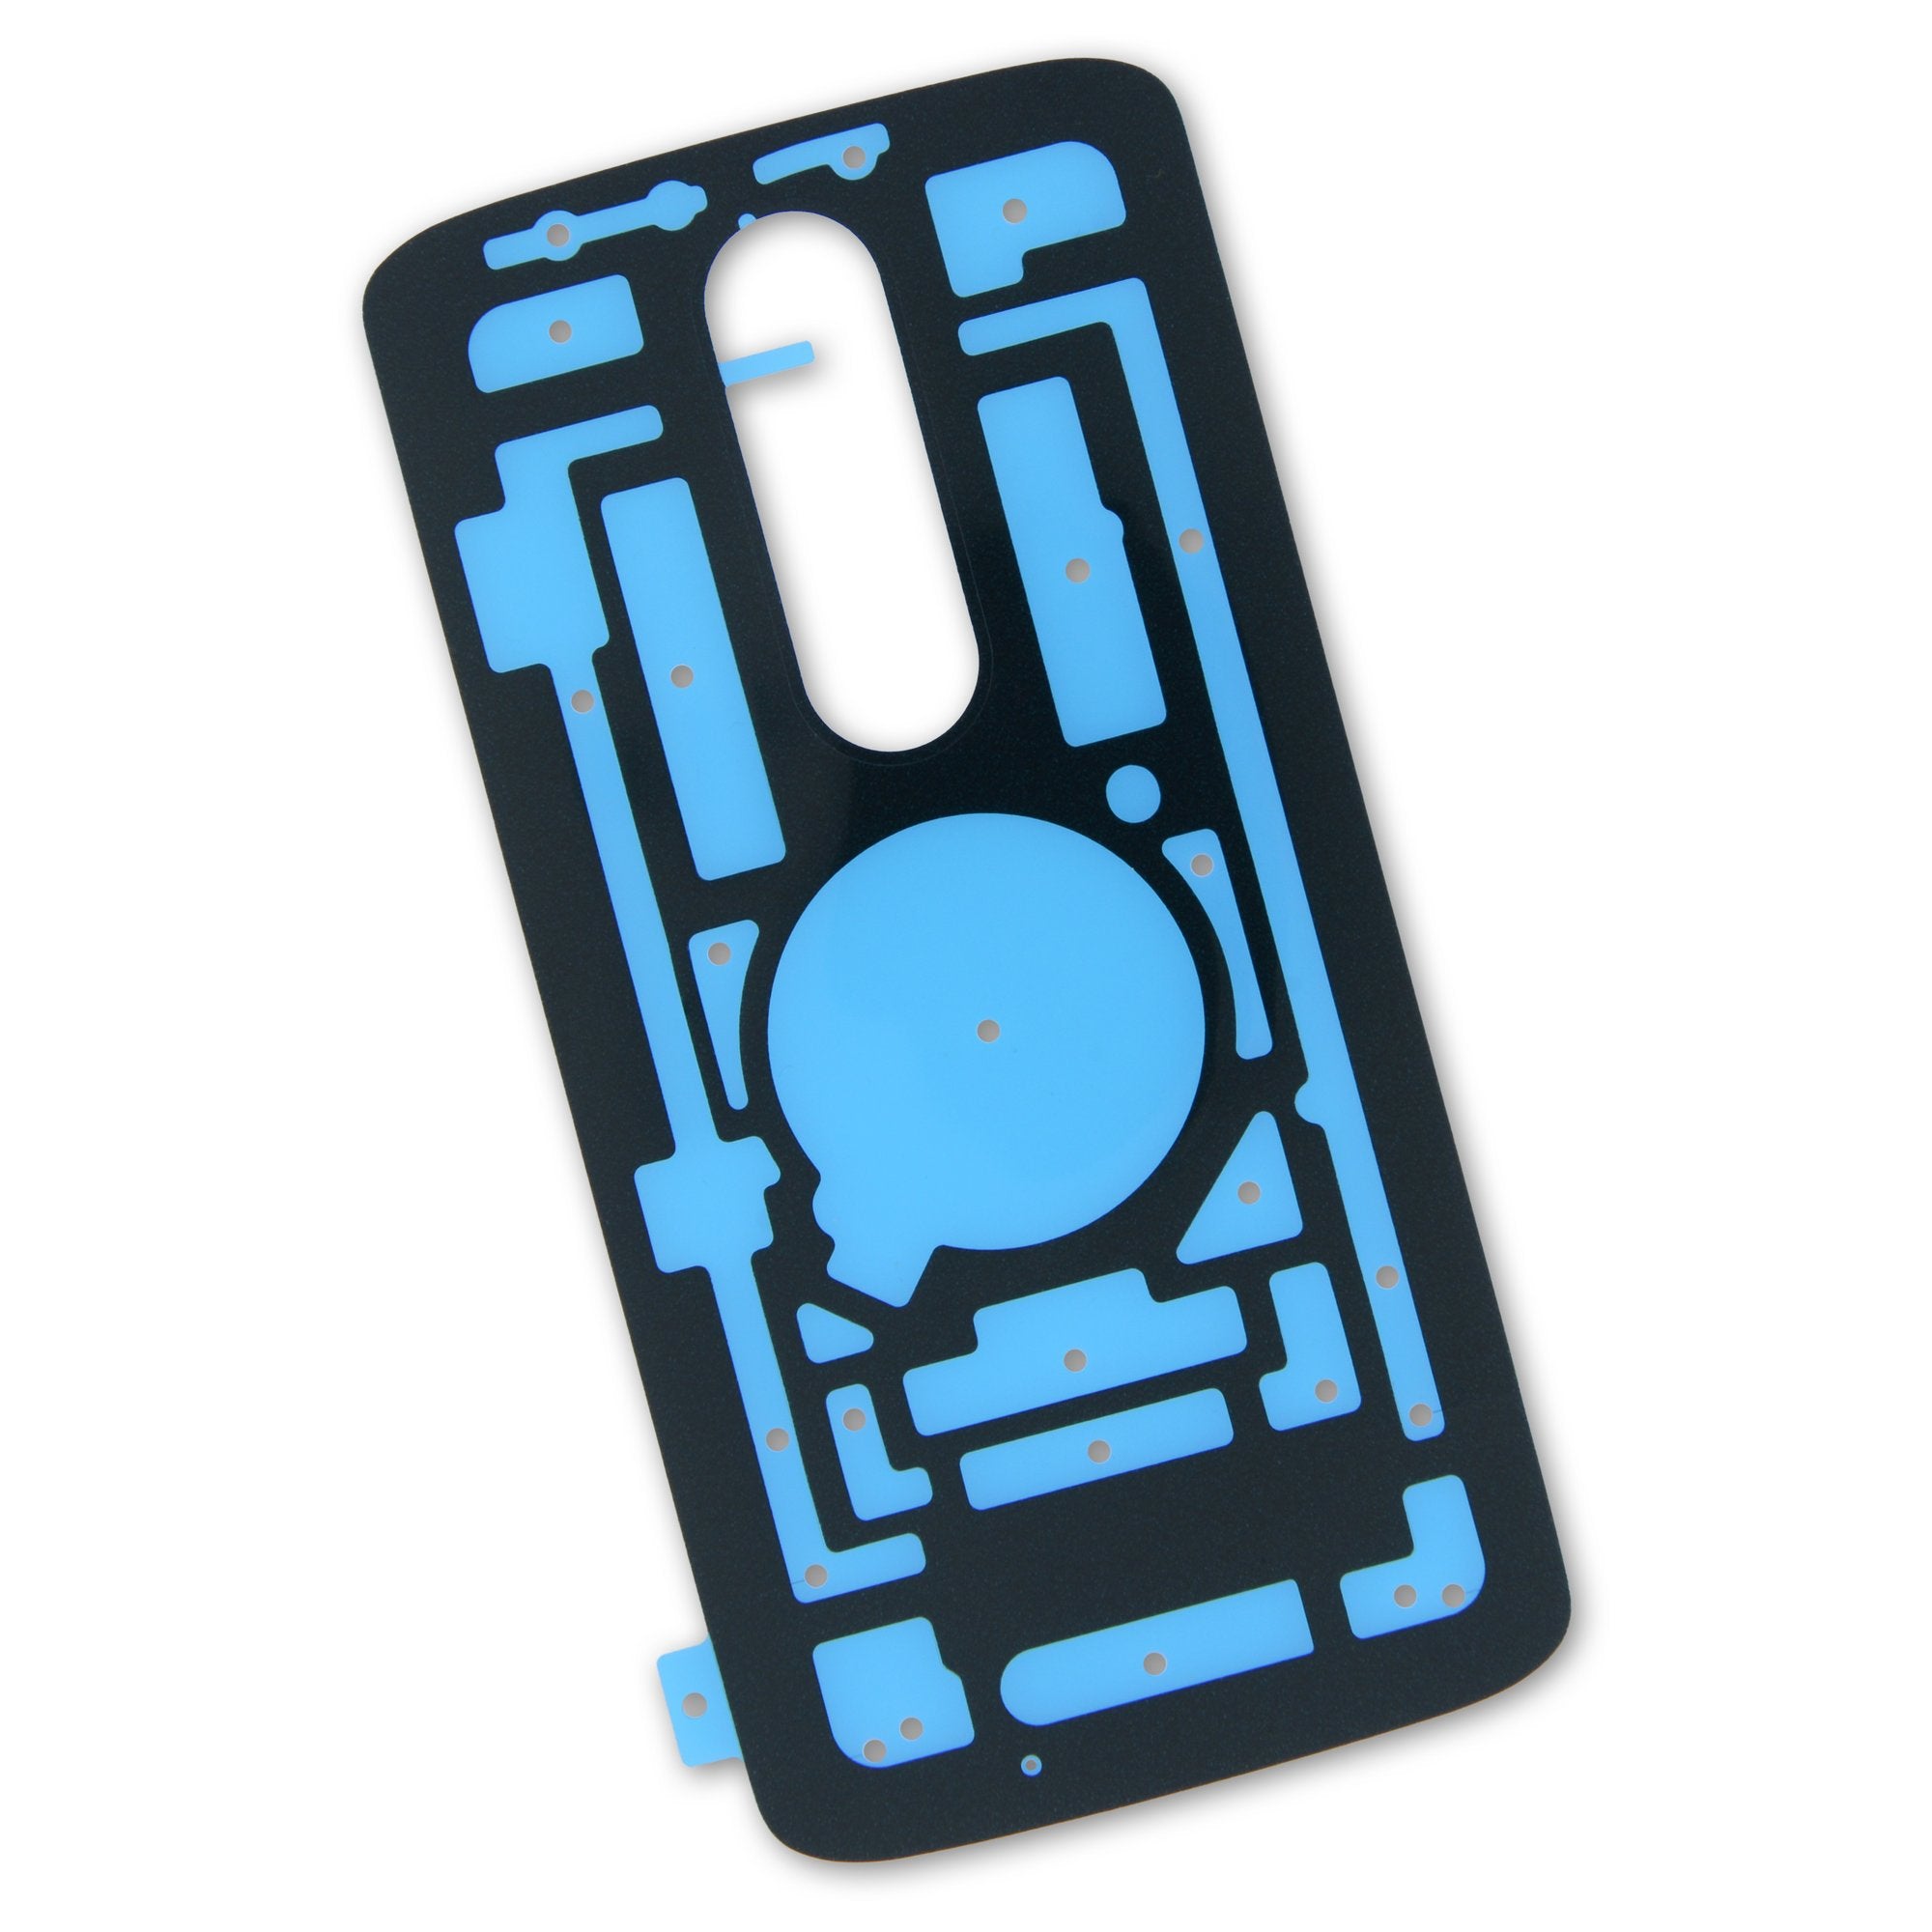 Droid Turbo 2 Rear Cover Adhesive